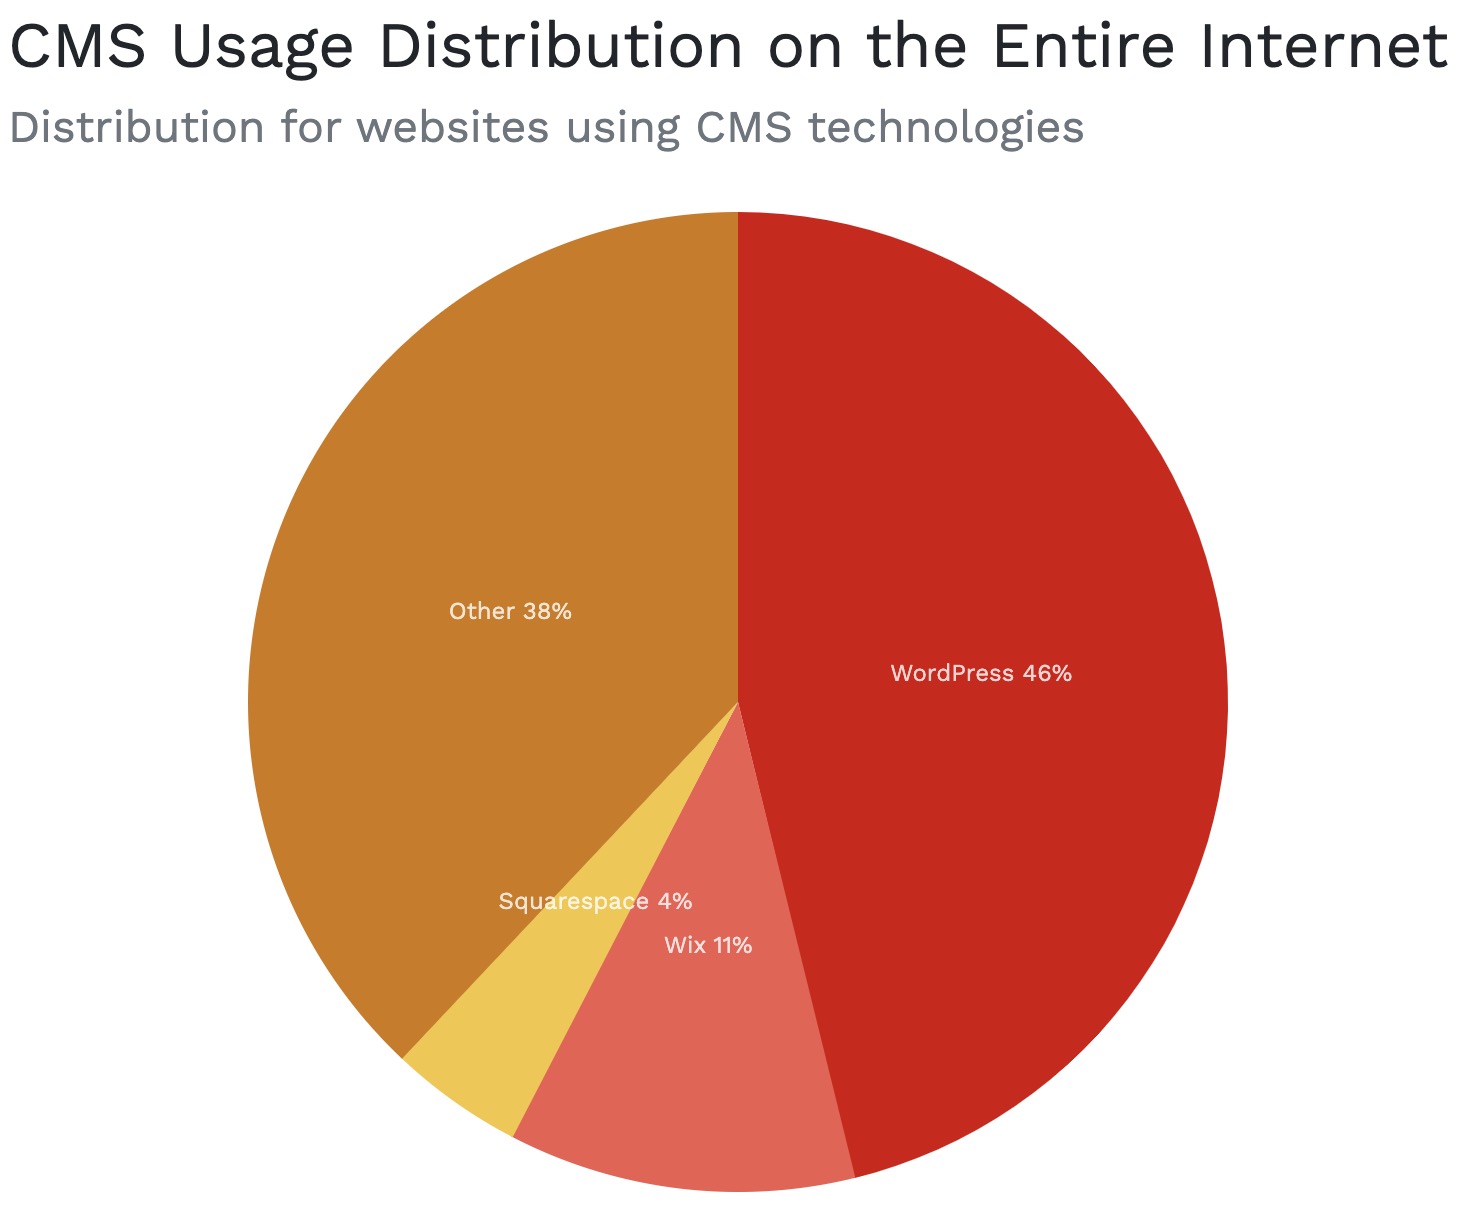 A pie chart showing WordPress has a 46% cms usage on the internet, Wix has 11%, Squarespace has 4%, and 